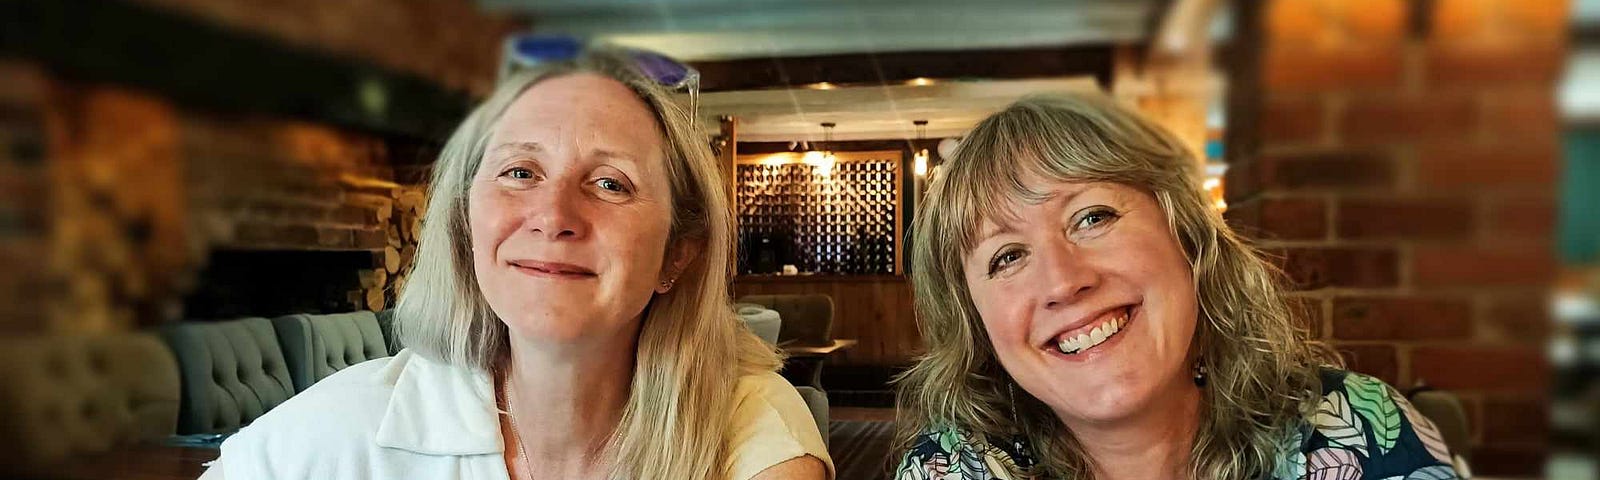 Two women are smiling and sitting at a table in a pub restaurant